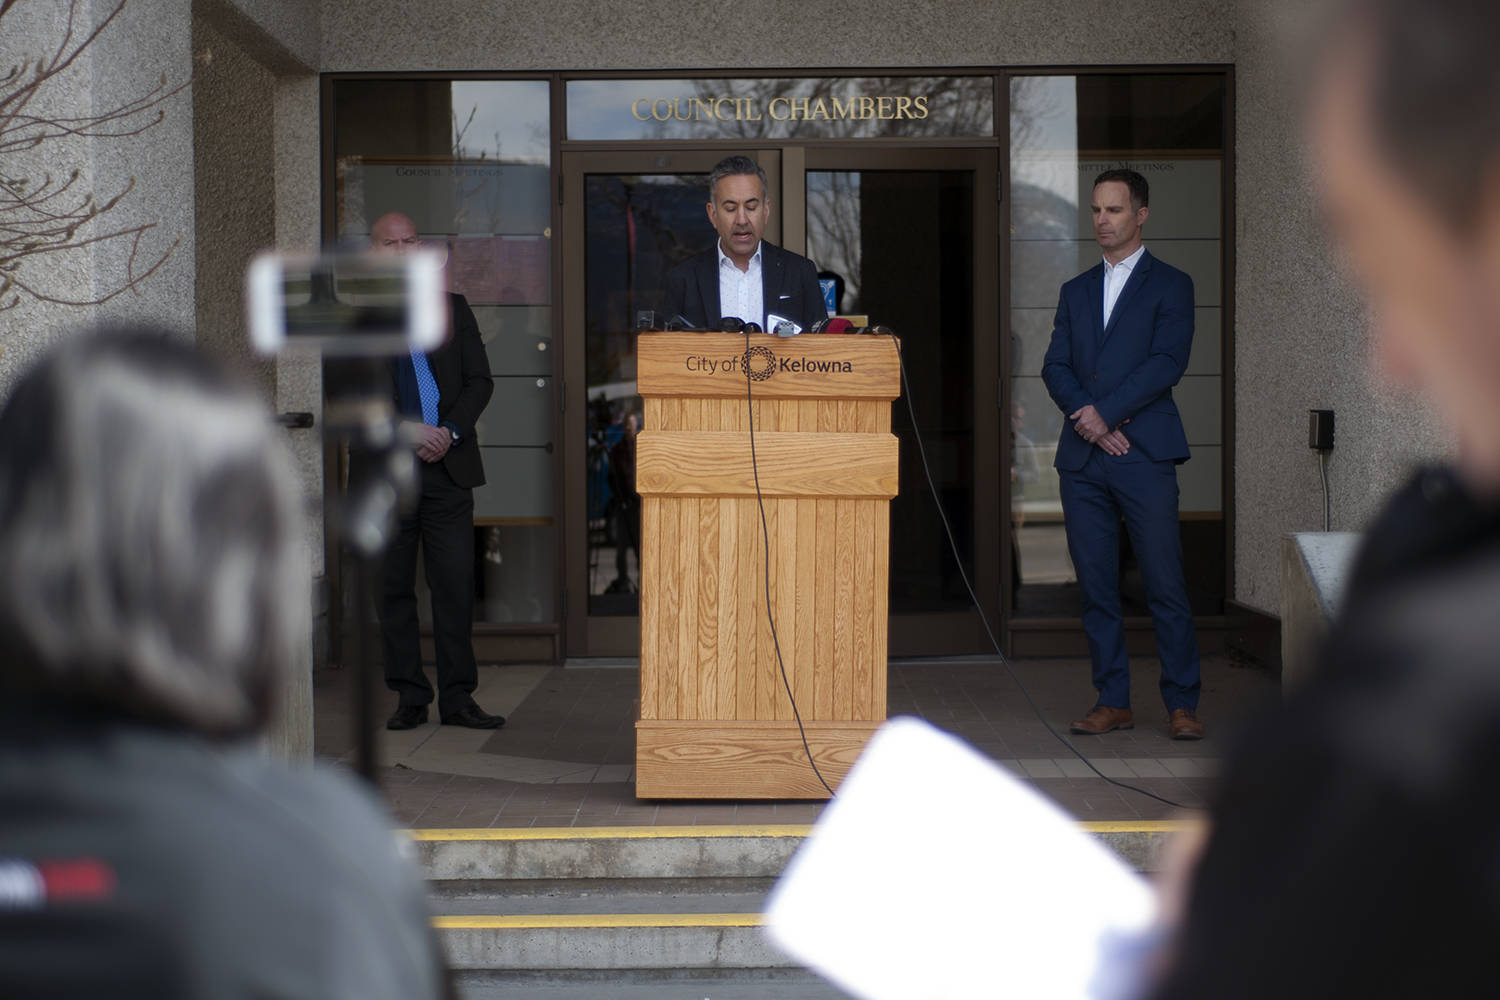 Kelowna Mayor Colin Basran addresses media from the front steps of council chambers on March 23. (Michael Rodriguez - Capital News)